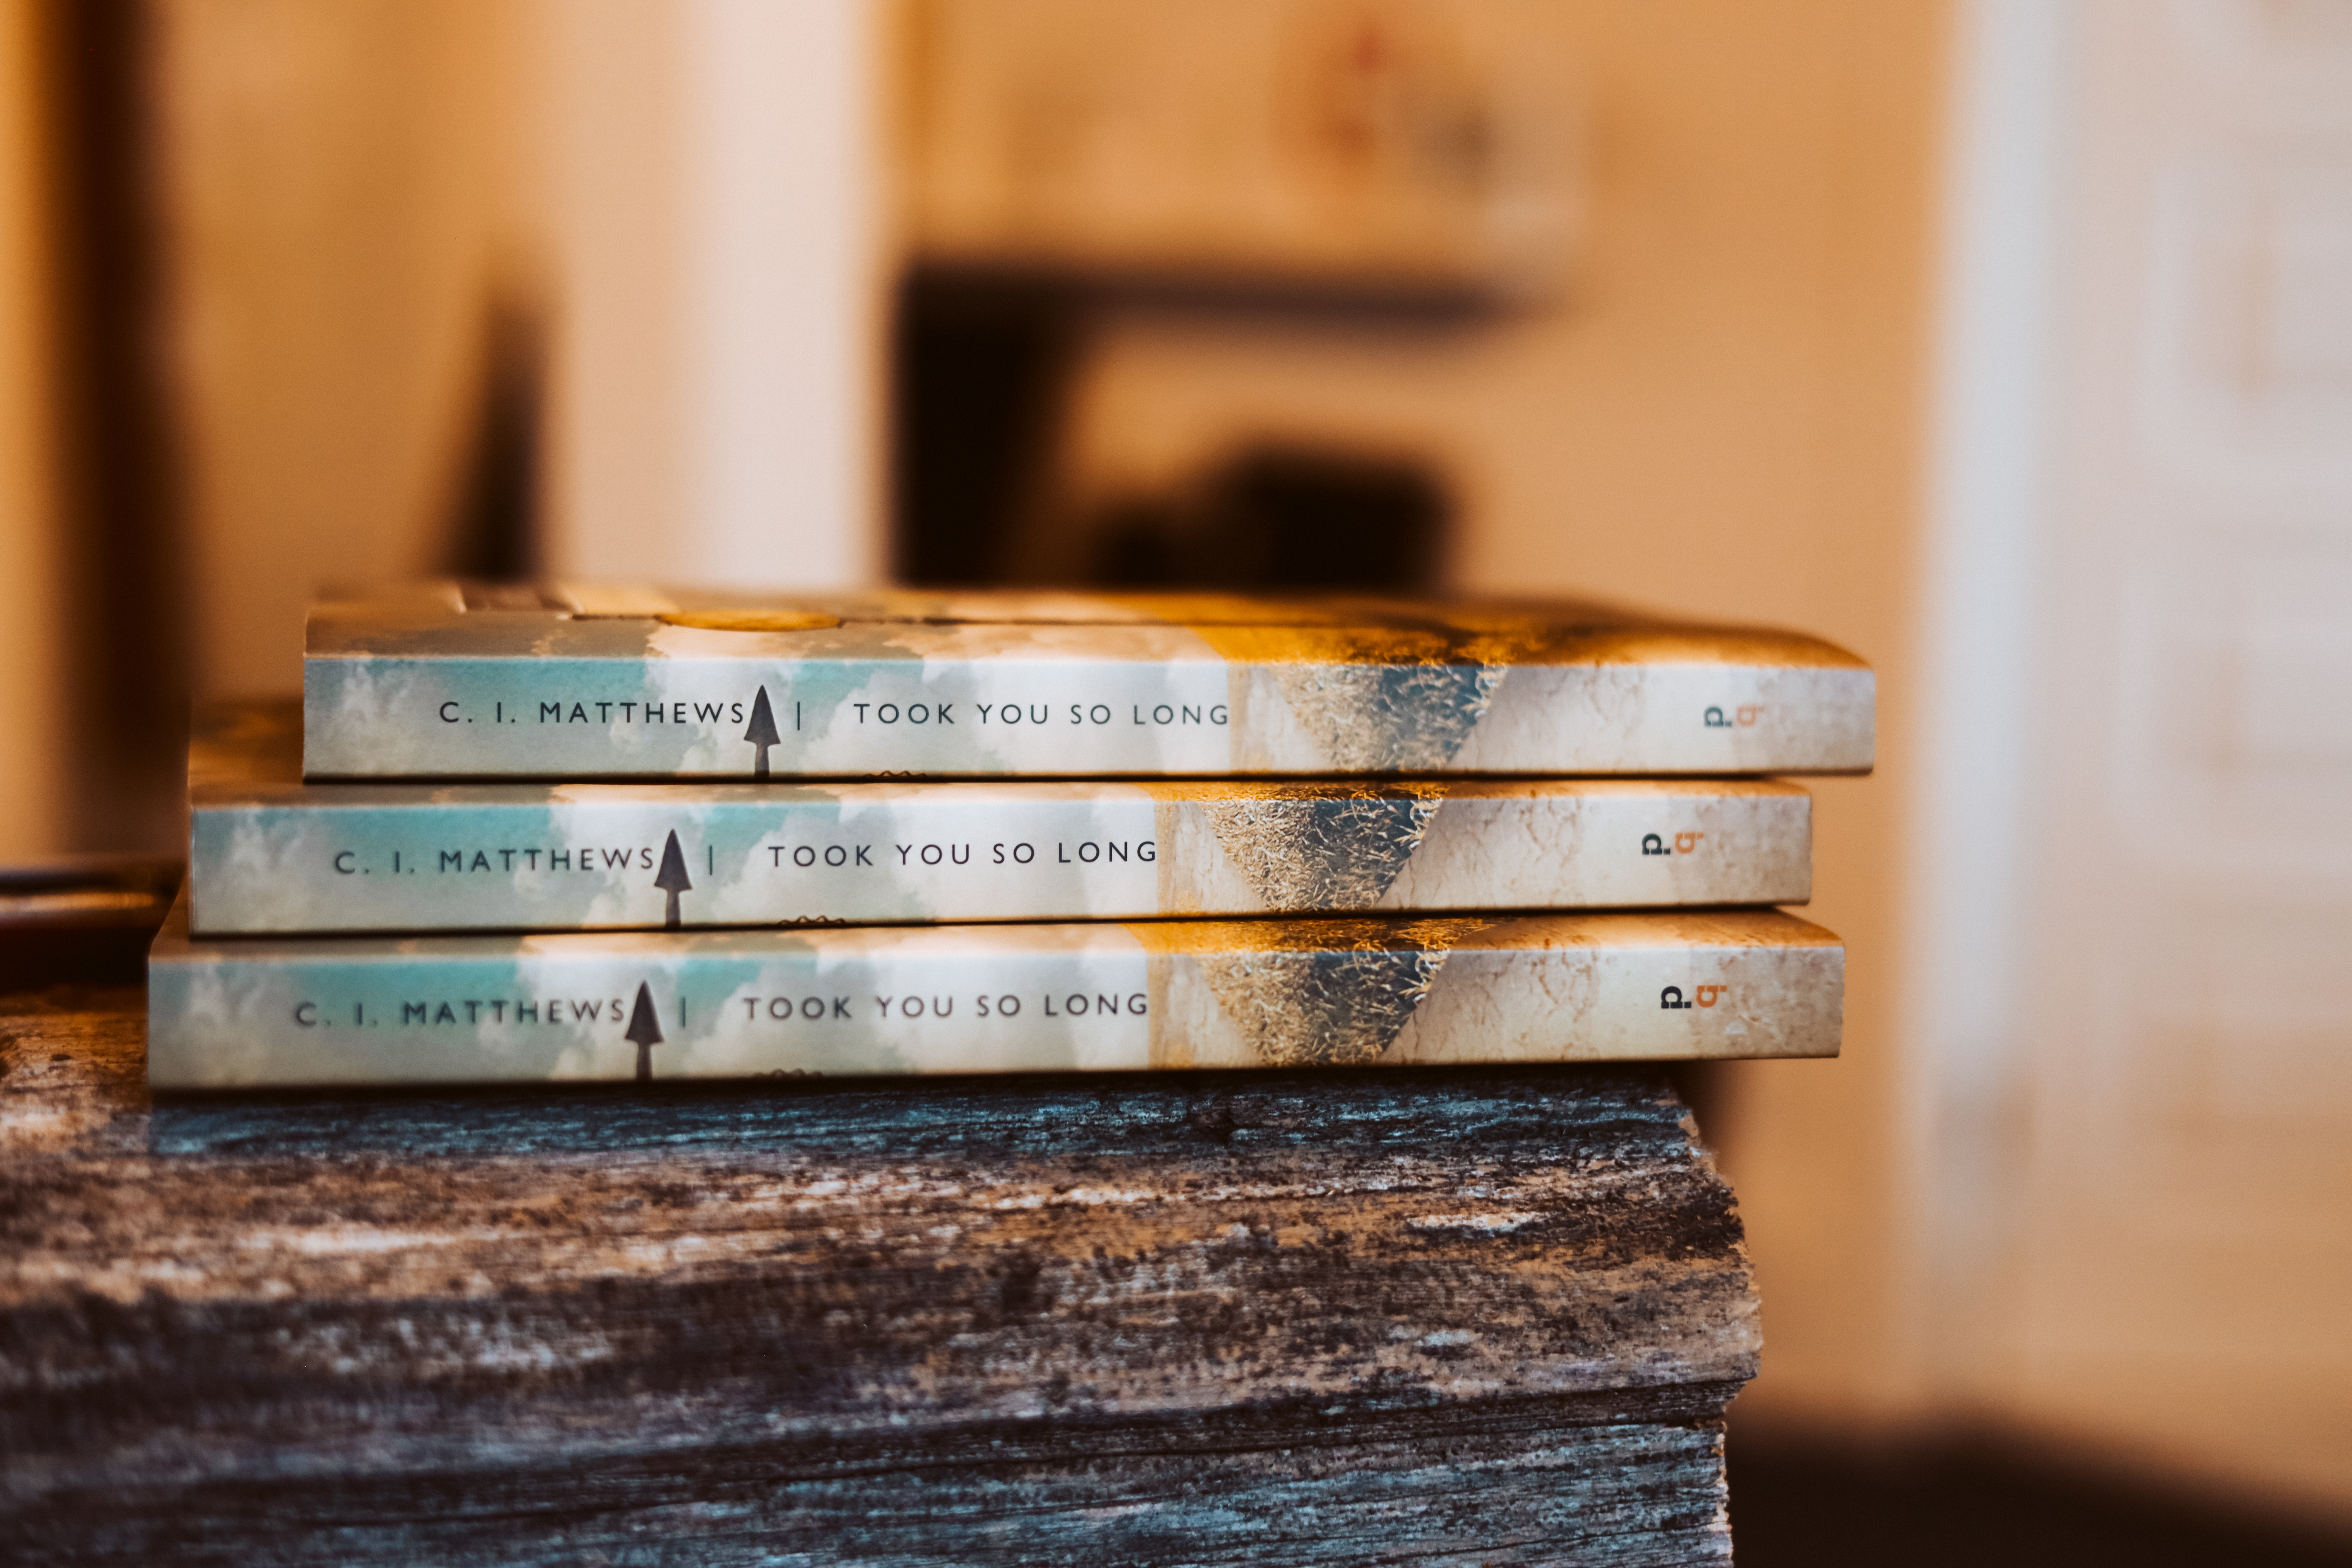 Three copies of the award-winning short story collection Took You So Long stacked on a wooden beam.